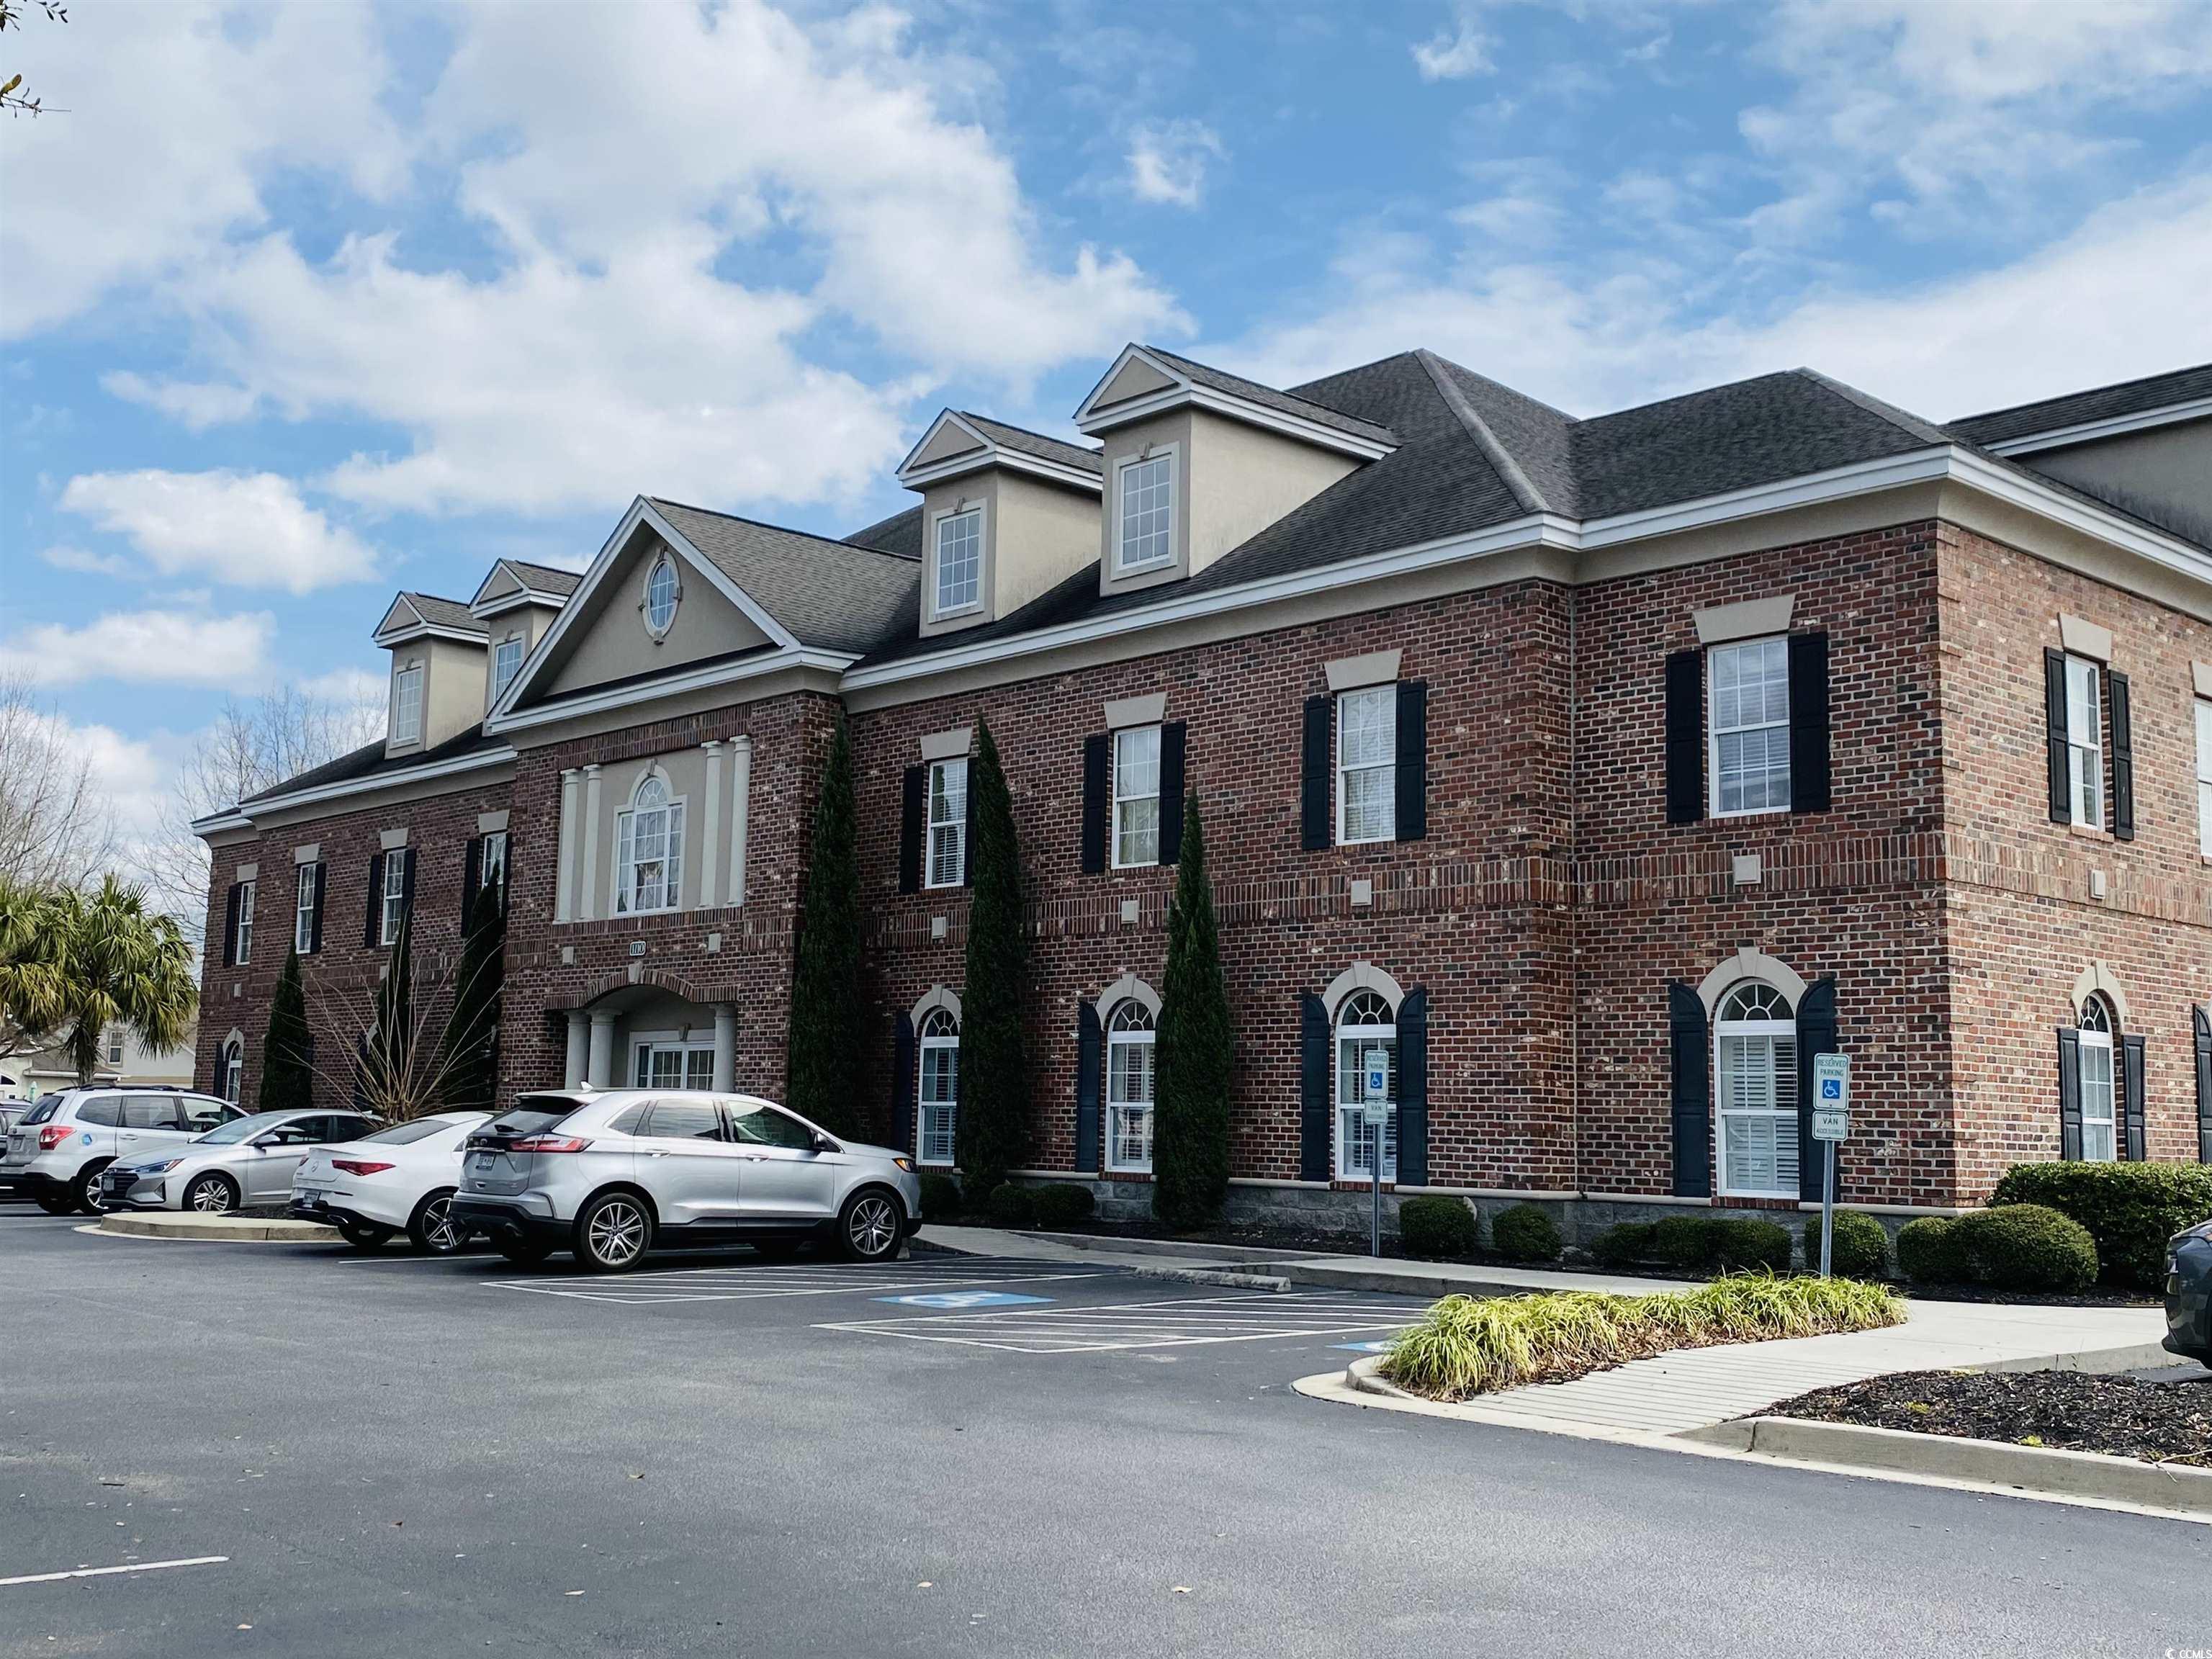 793 sq. ft., class a office space available in the crown business park. subject property is a first floor office suite that offers very efficient floor plan that has a reception area, three office spaces, kitchen area and a private restroom.